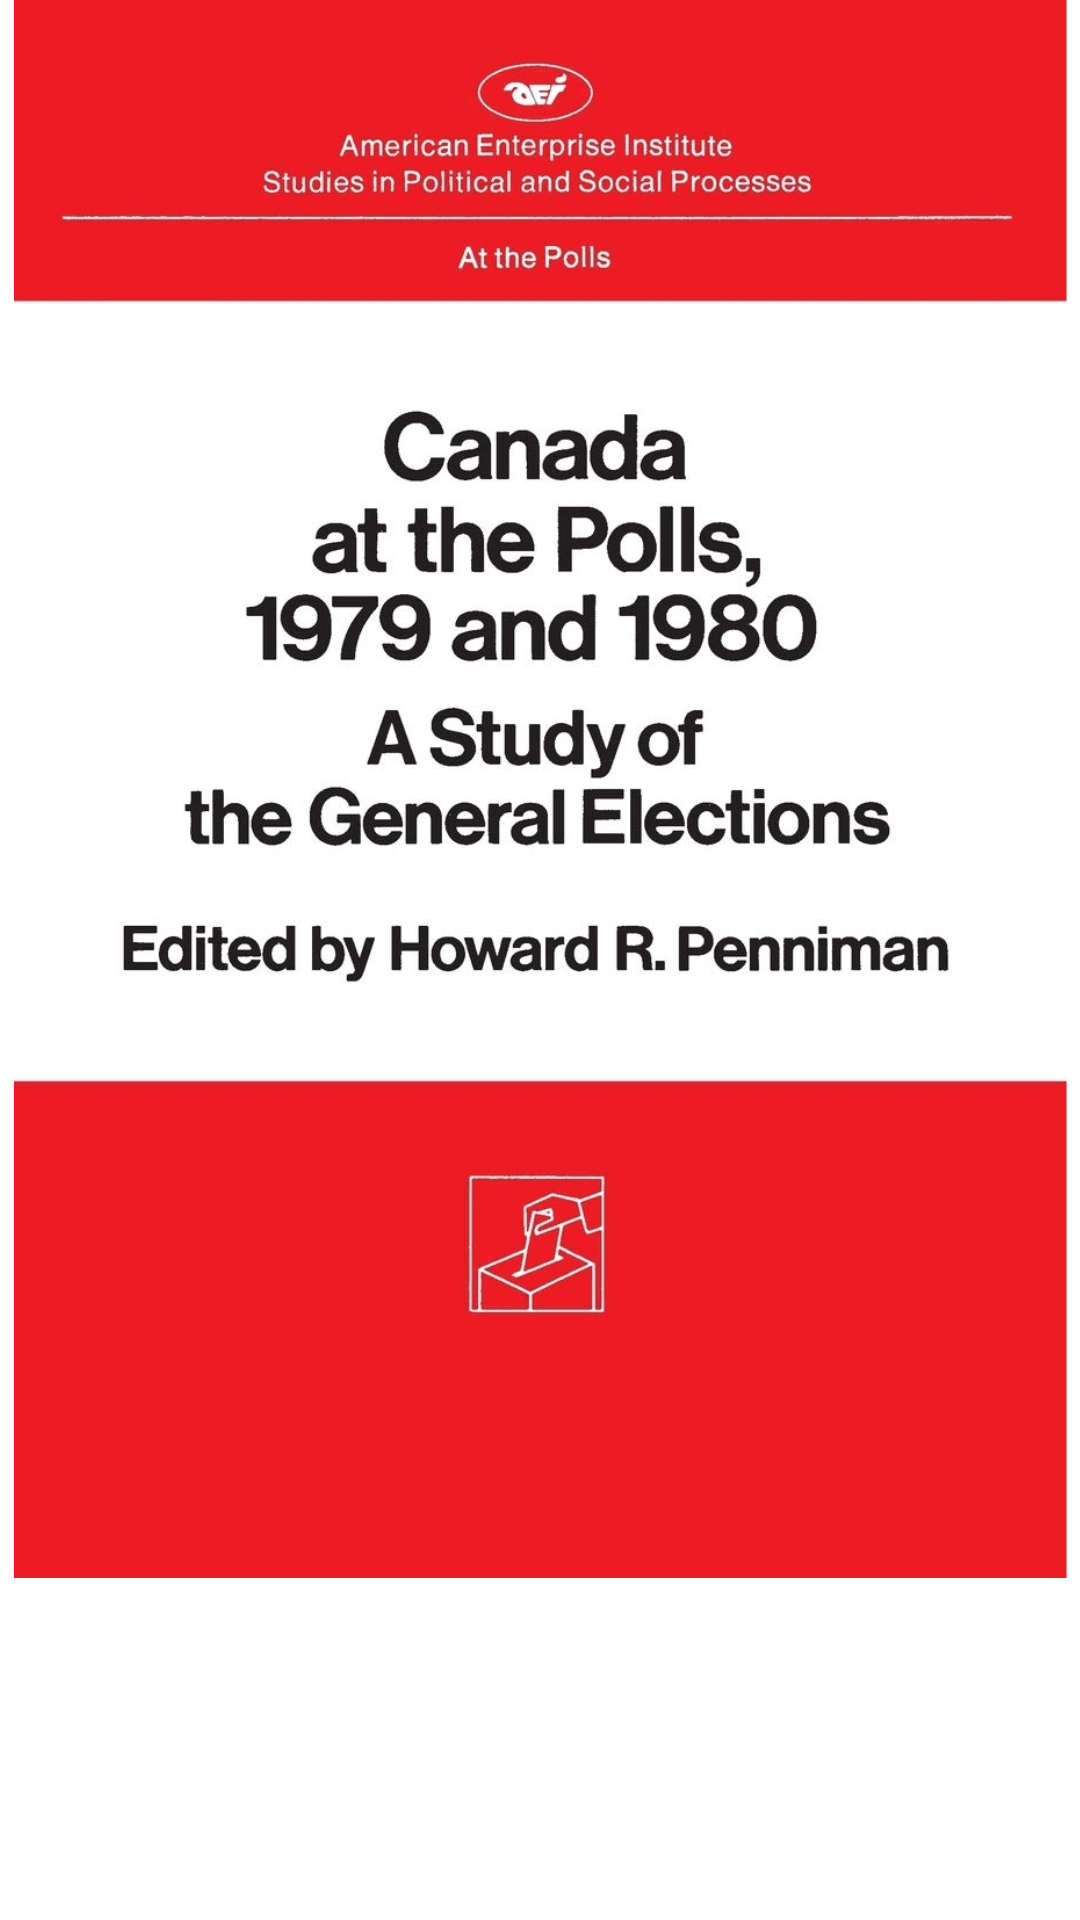 Canada at the Polls, 1979 and 1980: A Study of the General Elections